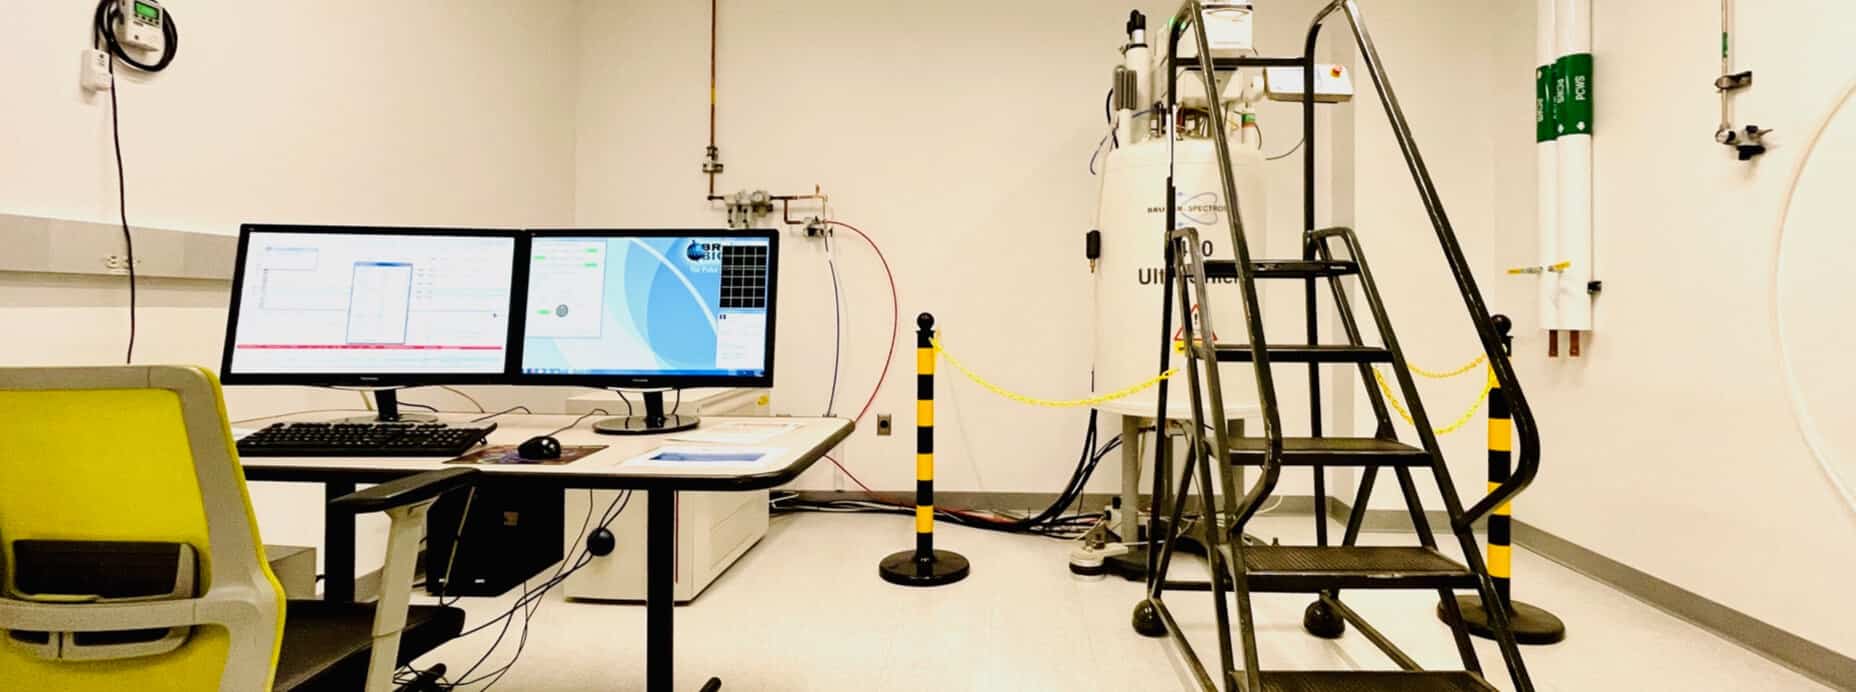 NMR at the Innovation Space